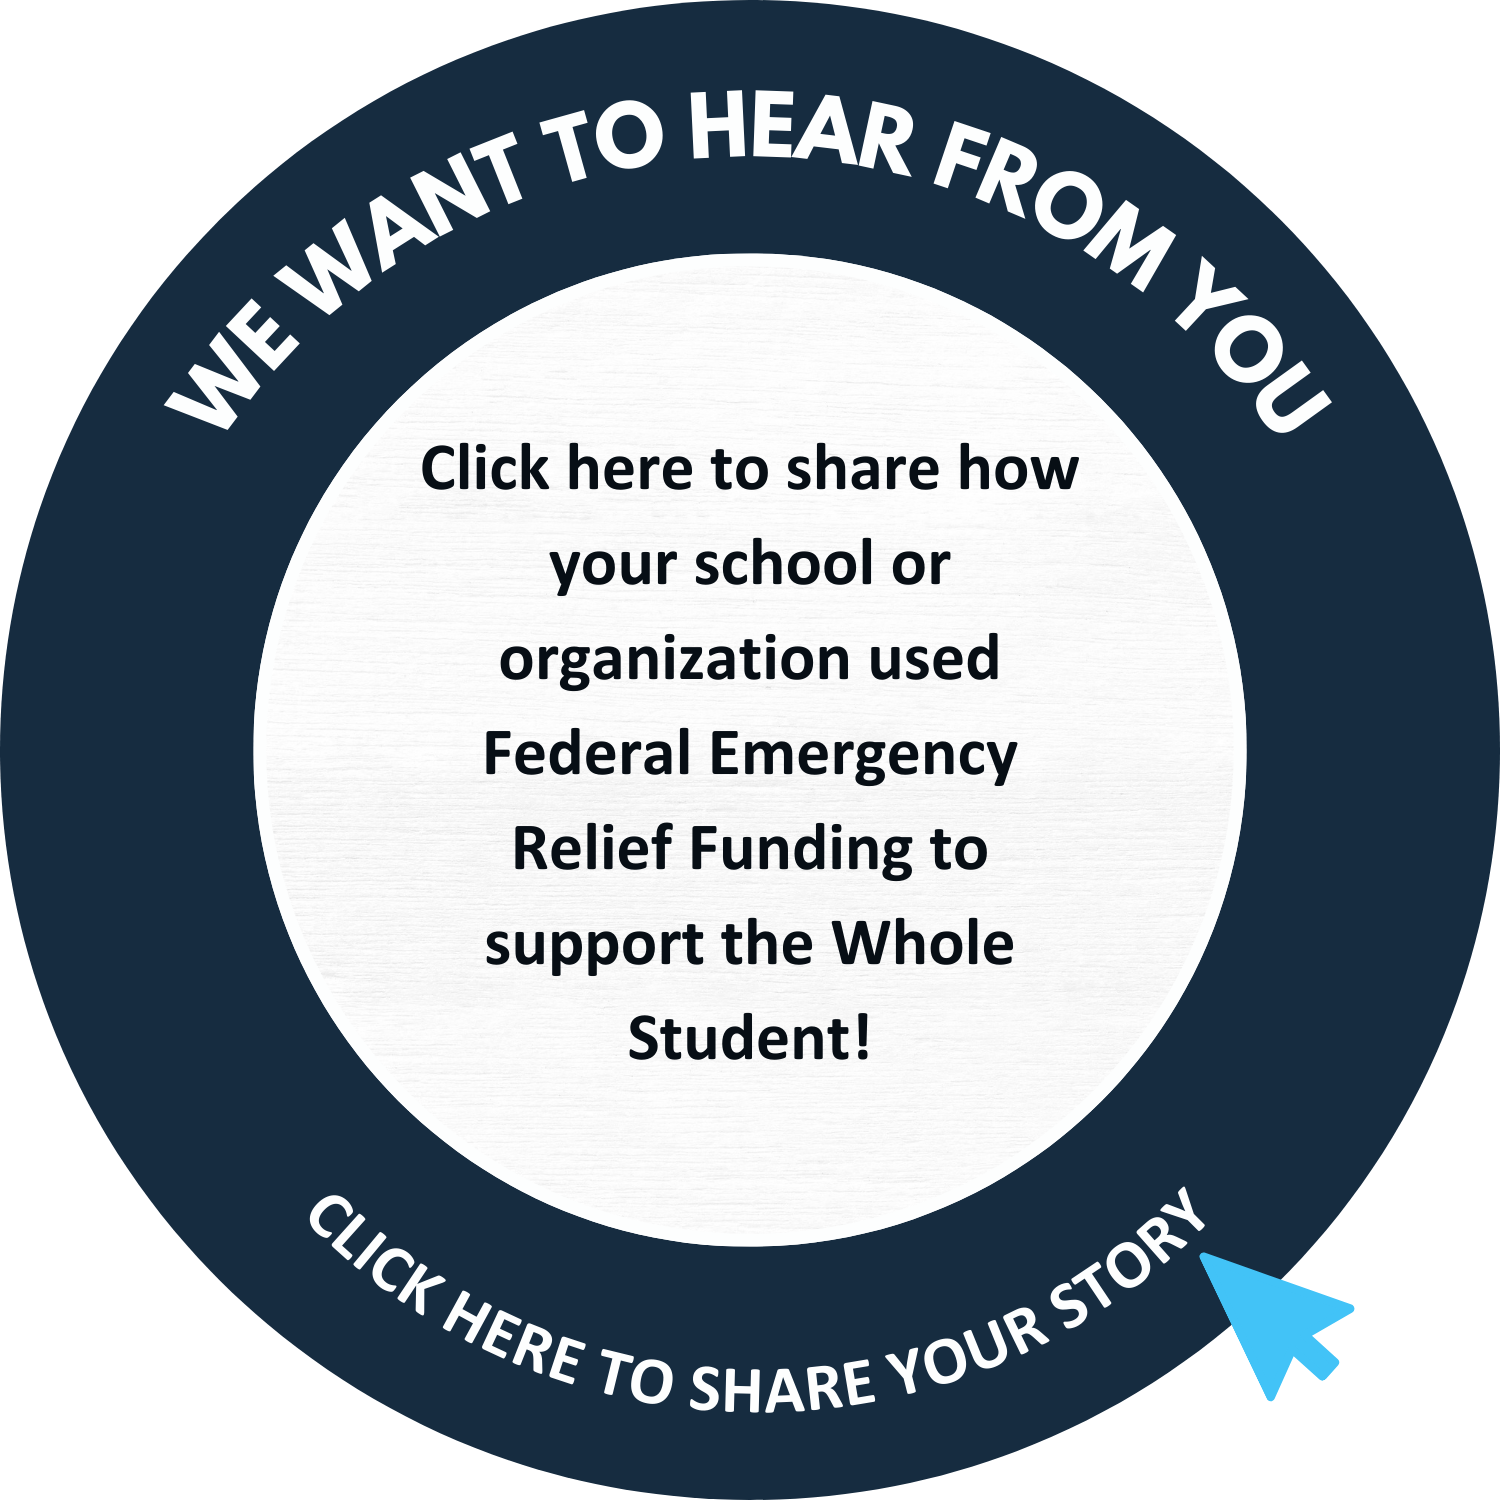 A hyperlinked circle graphic for visitors to click to share their Federal Emergency Relief Funding Story. The outside of the graphic says "We want to hear from you" and "Click Here to Share Your Story" on the outside and "Click here to share how your school or organization used Federal Emergency Relief Funding to support the Whole Student!"